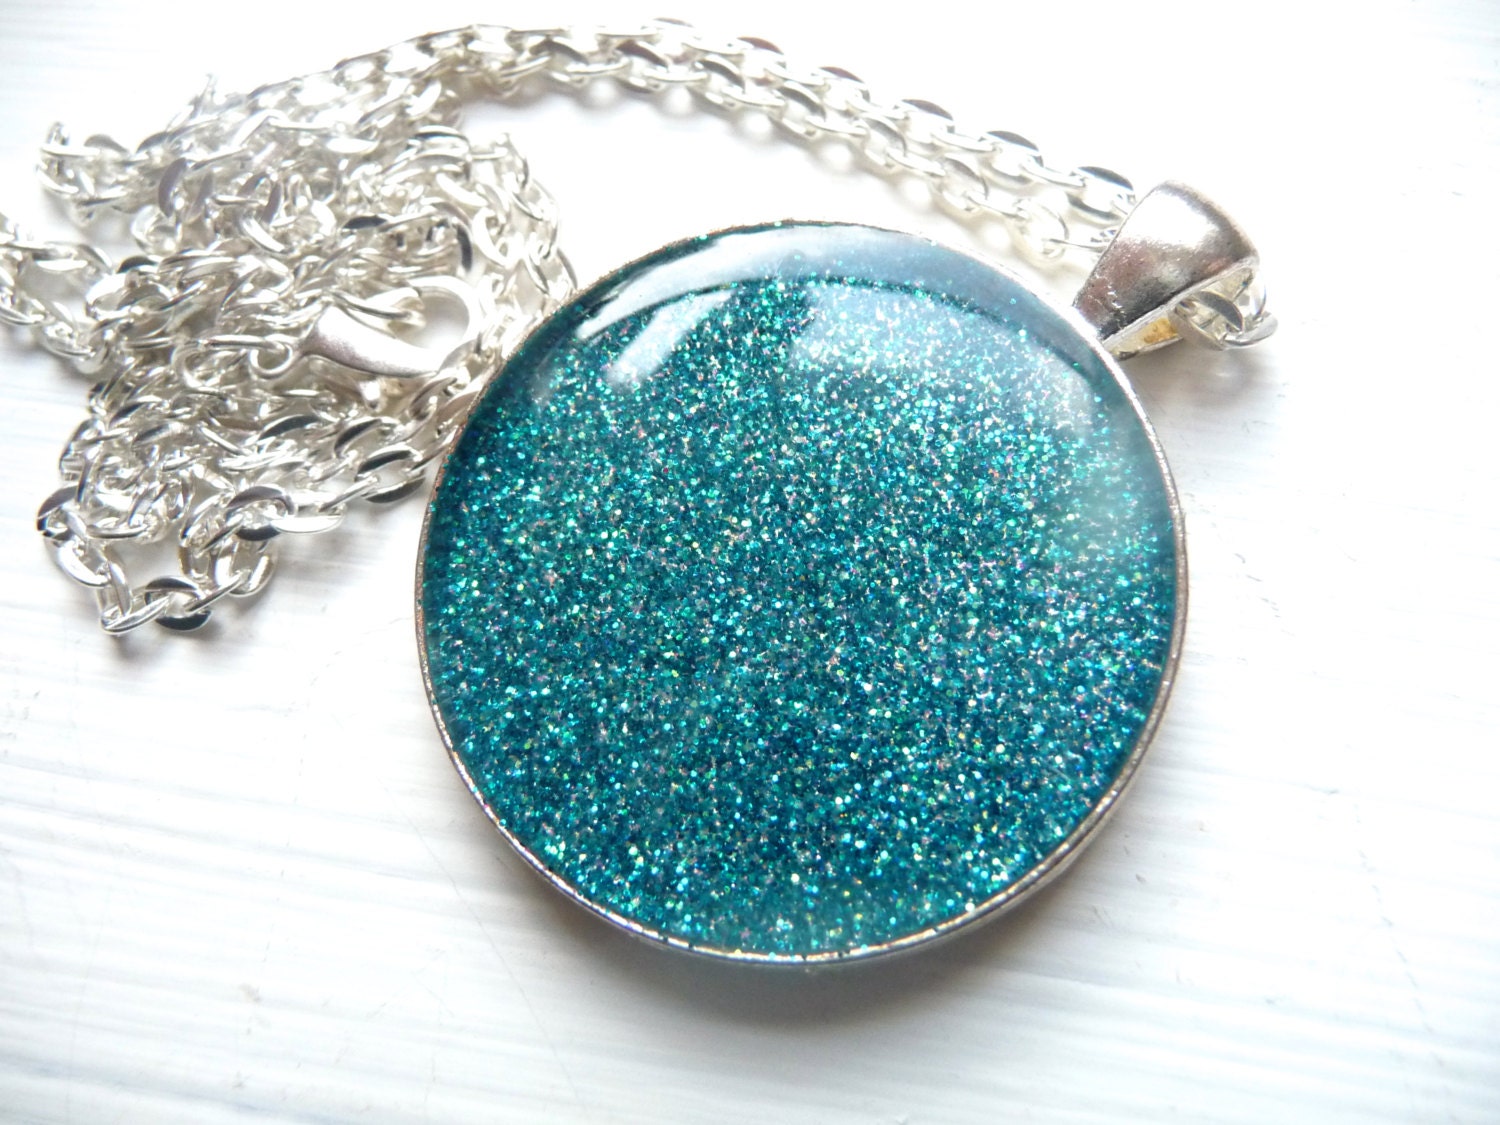 Blue Teal Glitter Resin Pendant on 24 inch Silver Chain - Mylana